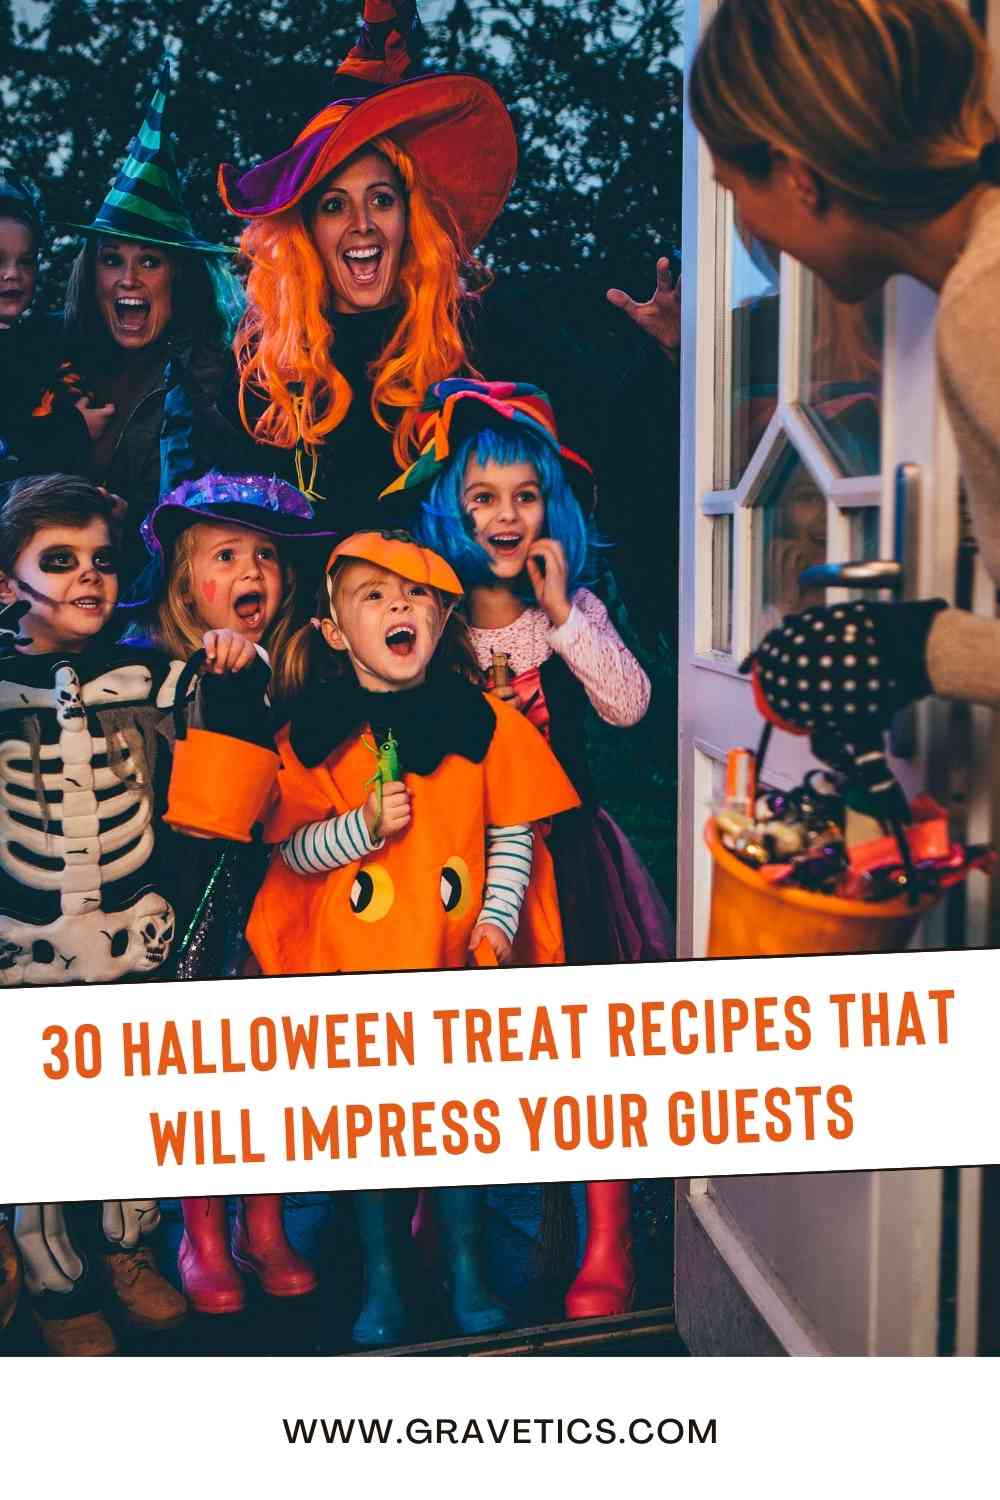 30 Halloween Treat Recipes That Will Impress Your Guests